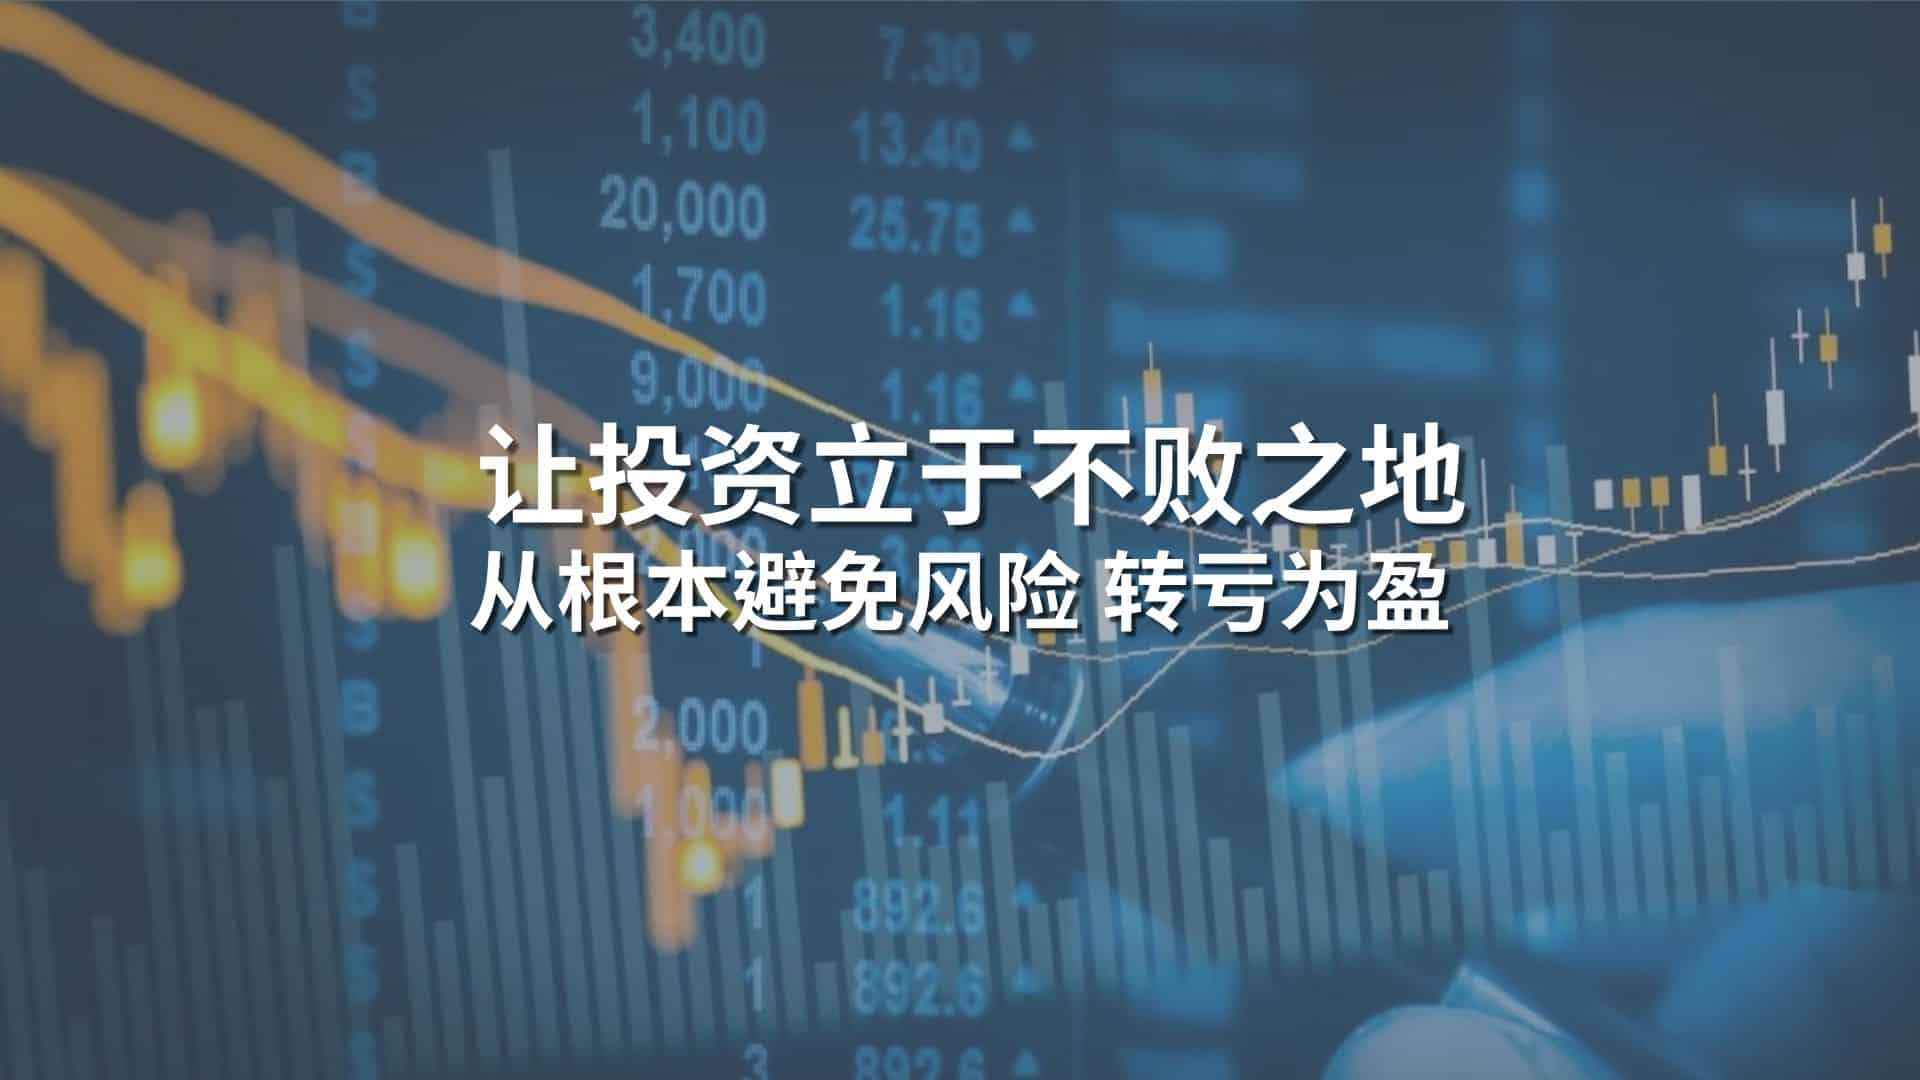 Read more about the article 投资进化论 – 如何实现转亏为盈，持续盈利 | Ai Financial